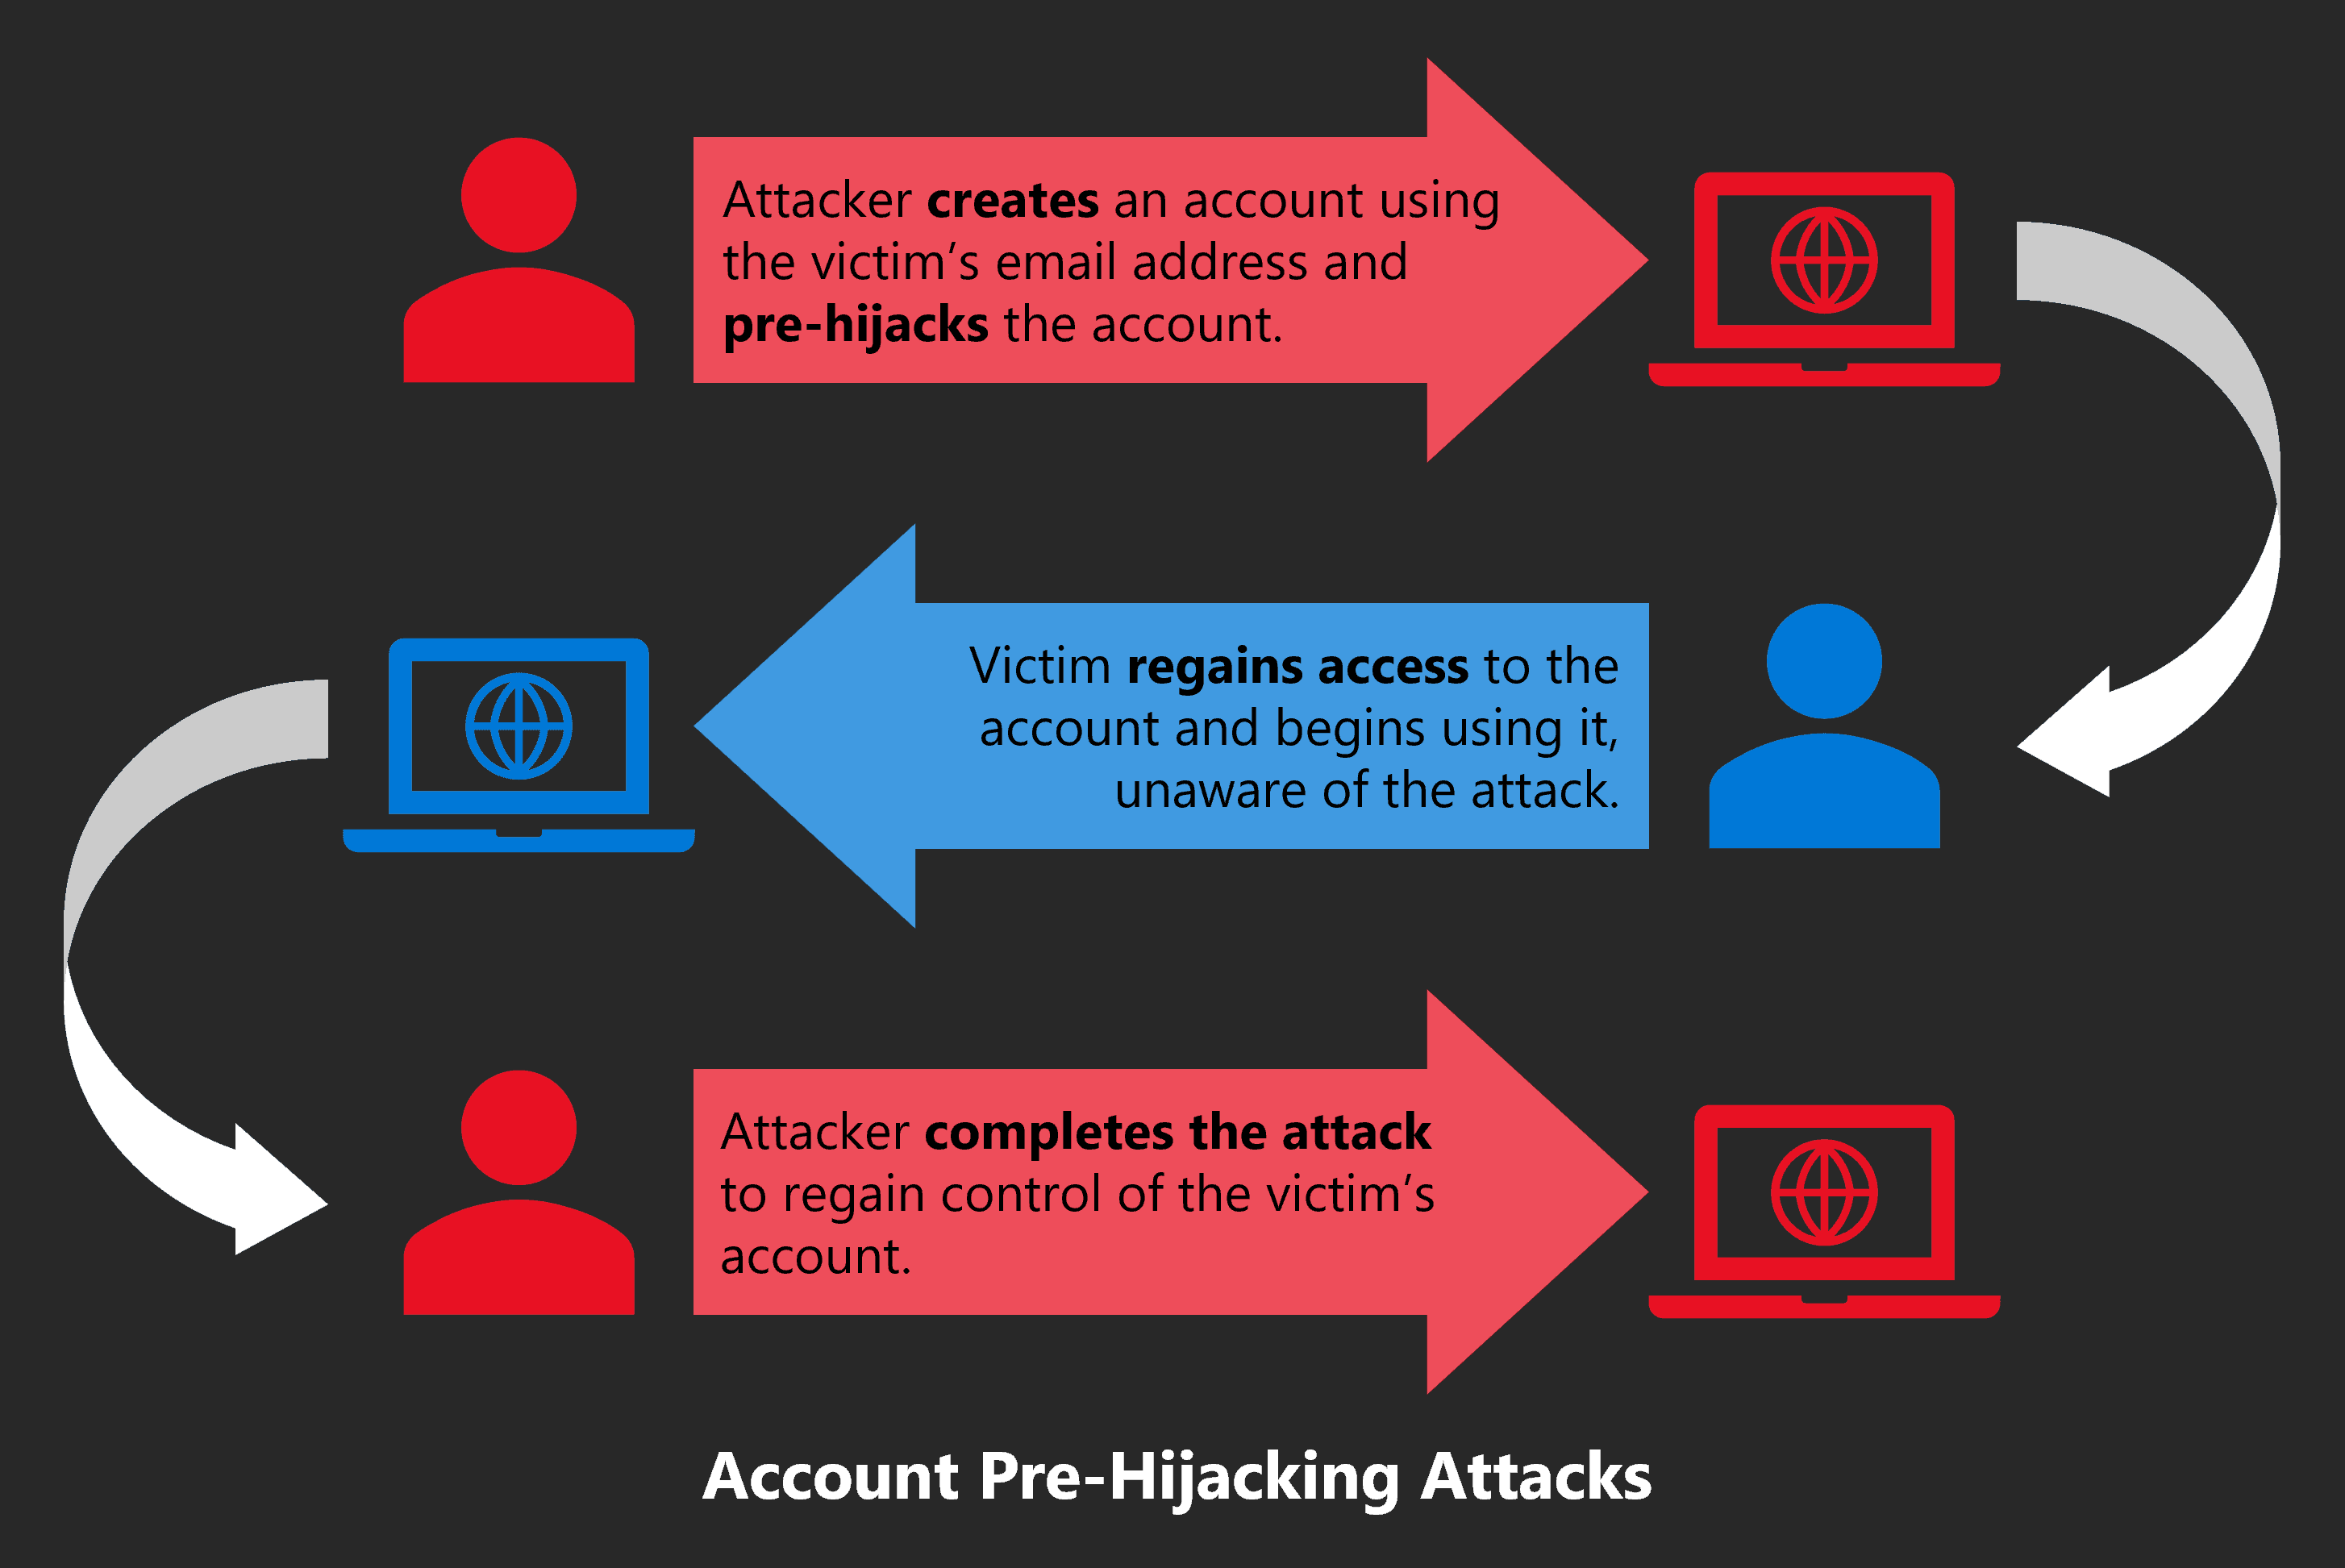 Account_Pre-Hijacking_Attacks_Overview.webp